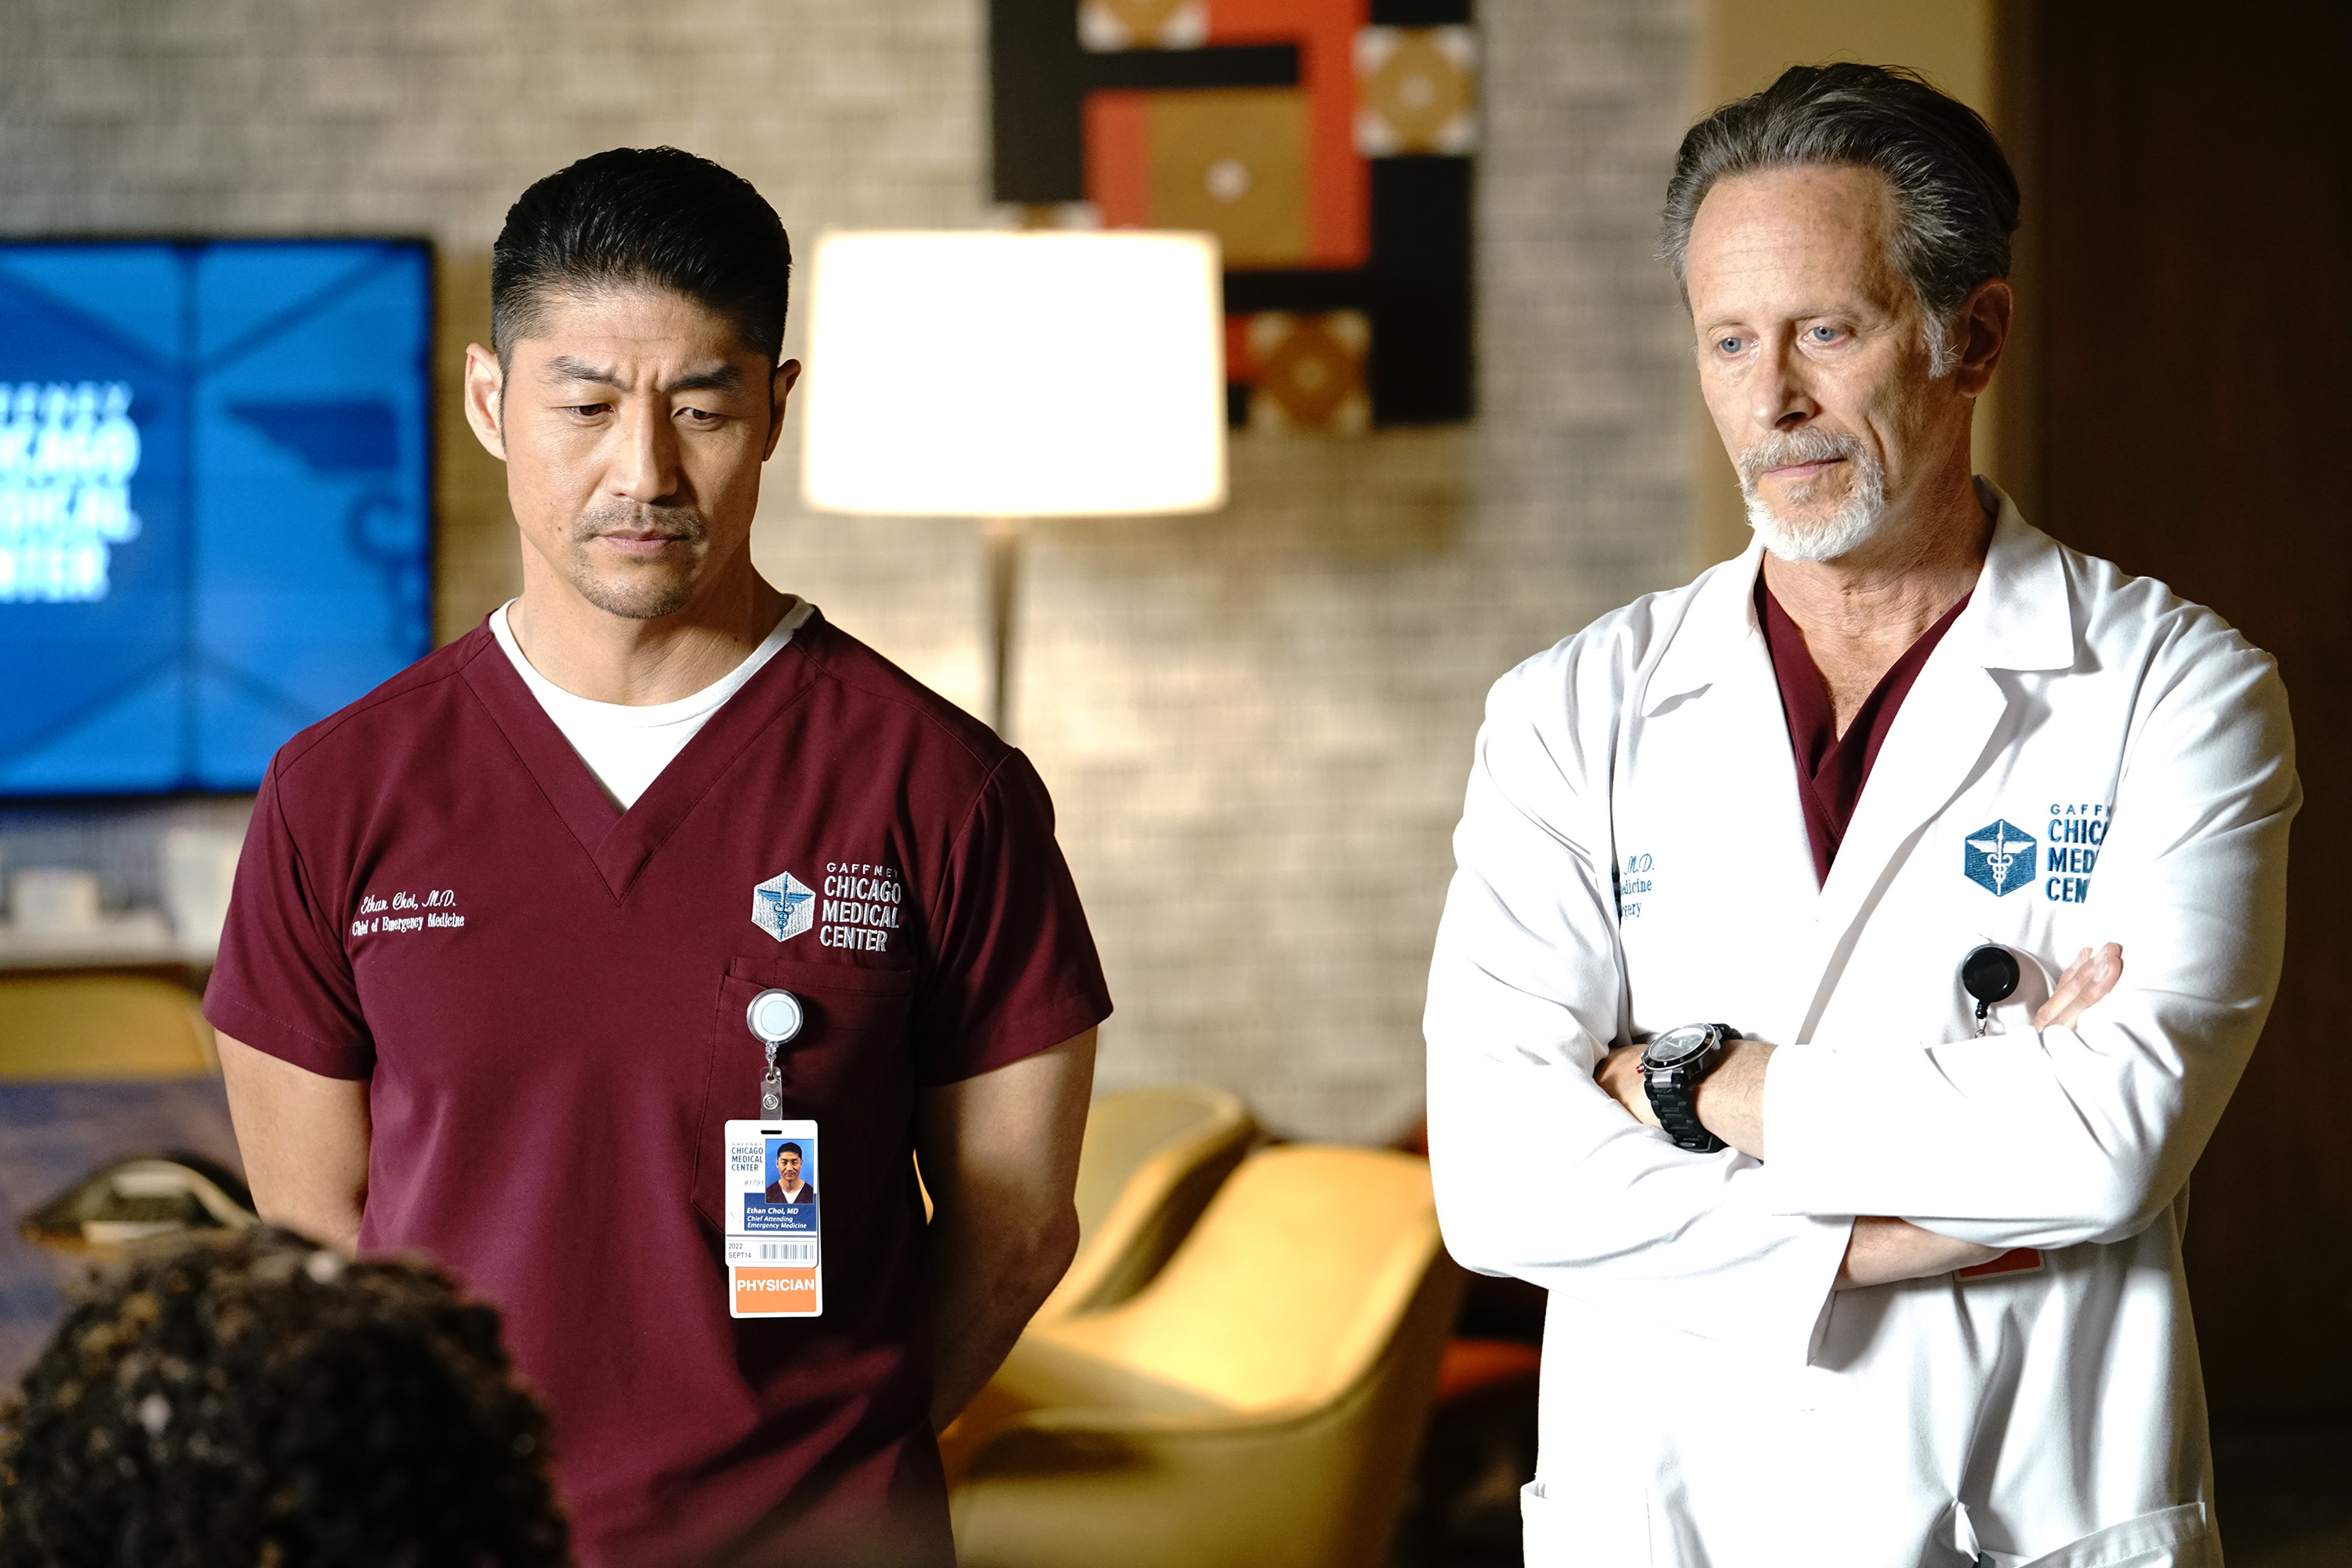 Brian Tee and Steven Weber stand next to each other in an office on the set of 'Chicago Med'